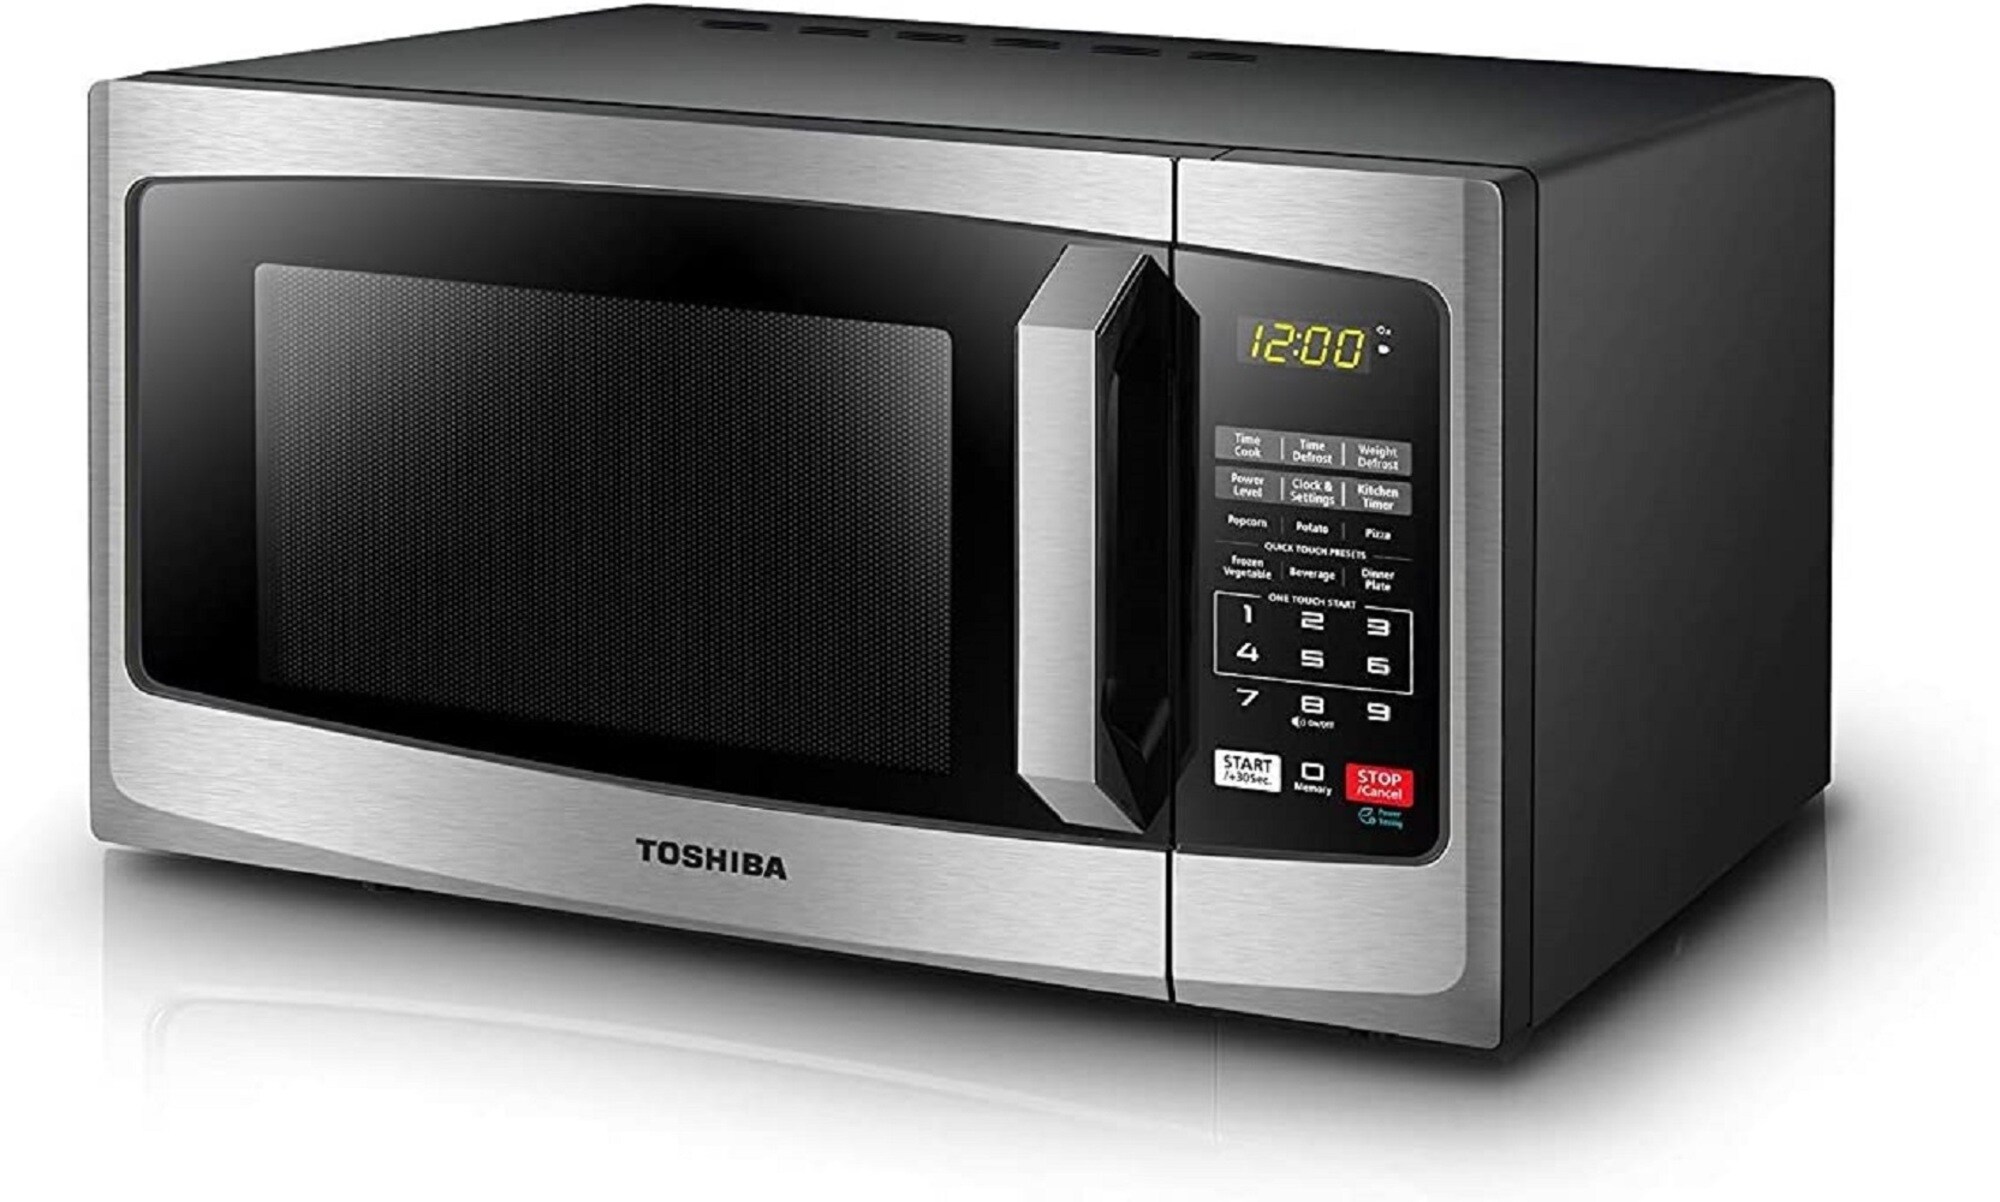 Toshiba Microwave for Sale in Seattle, WA - OfferUp